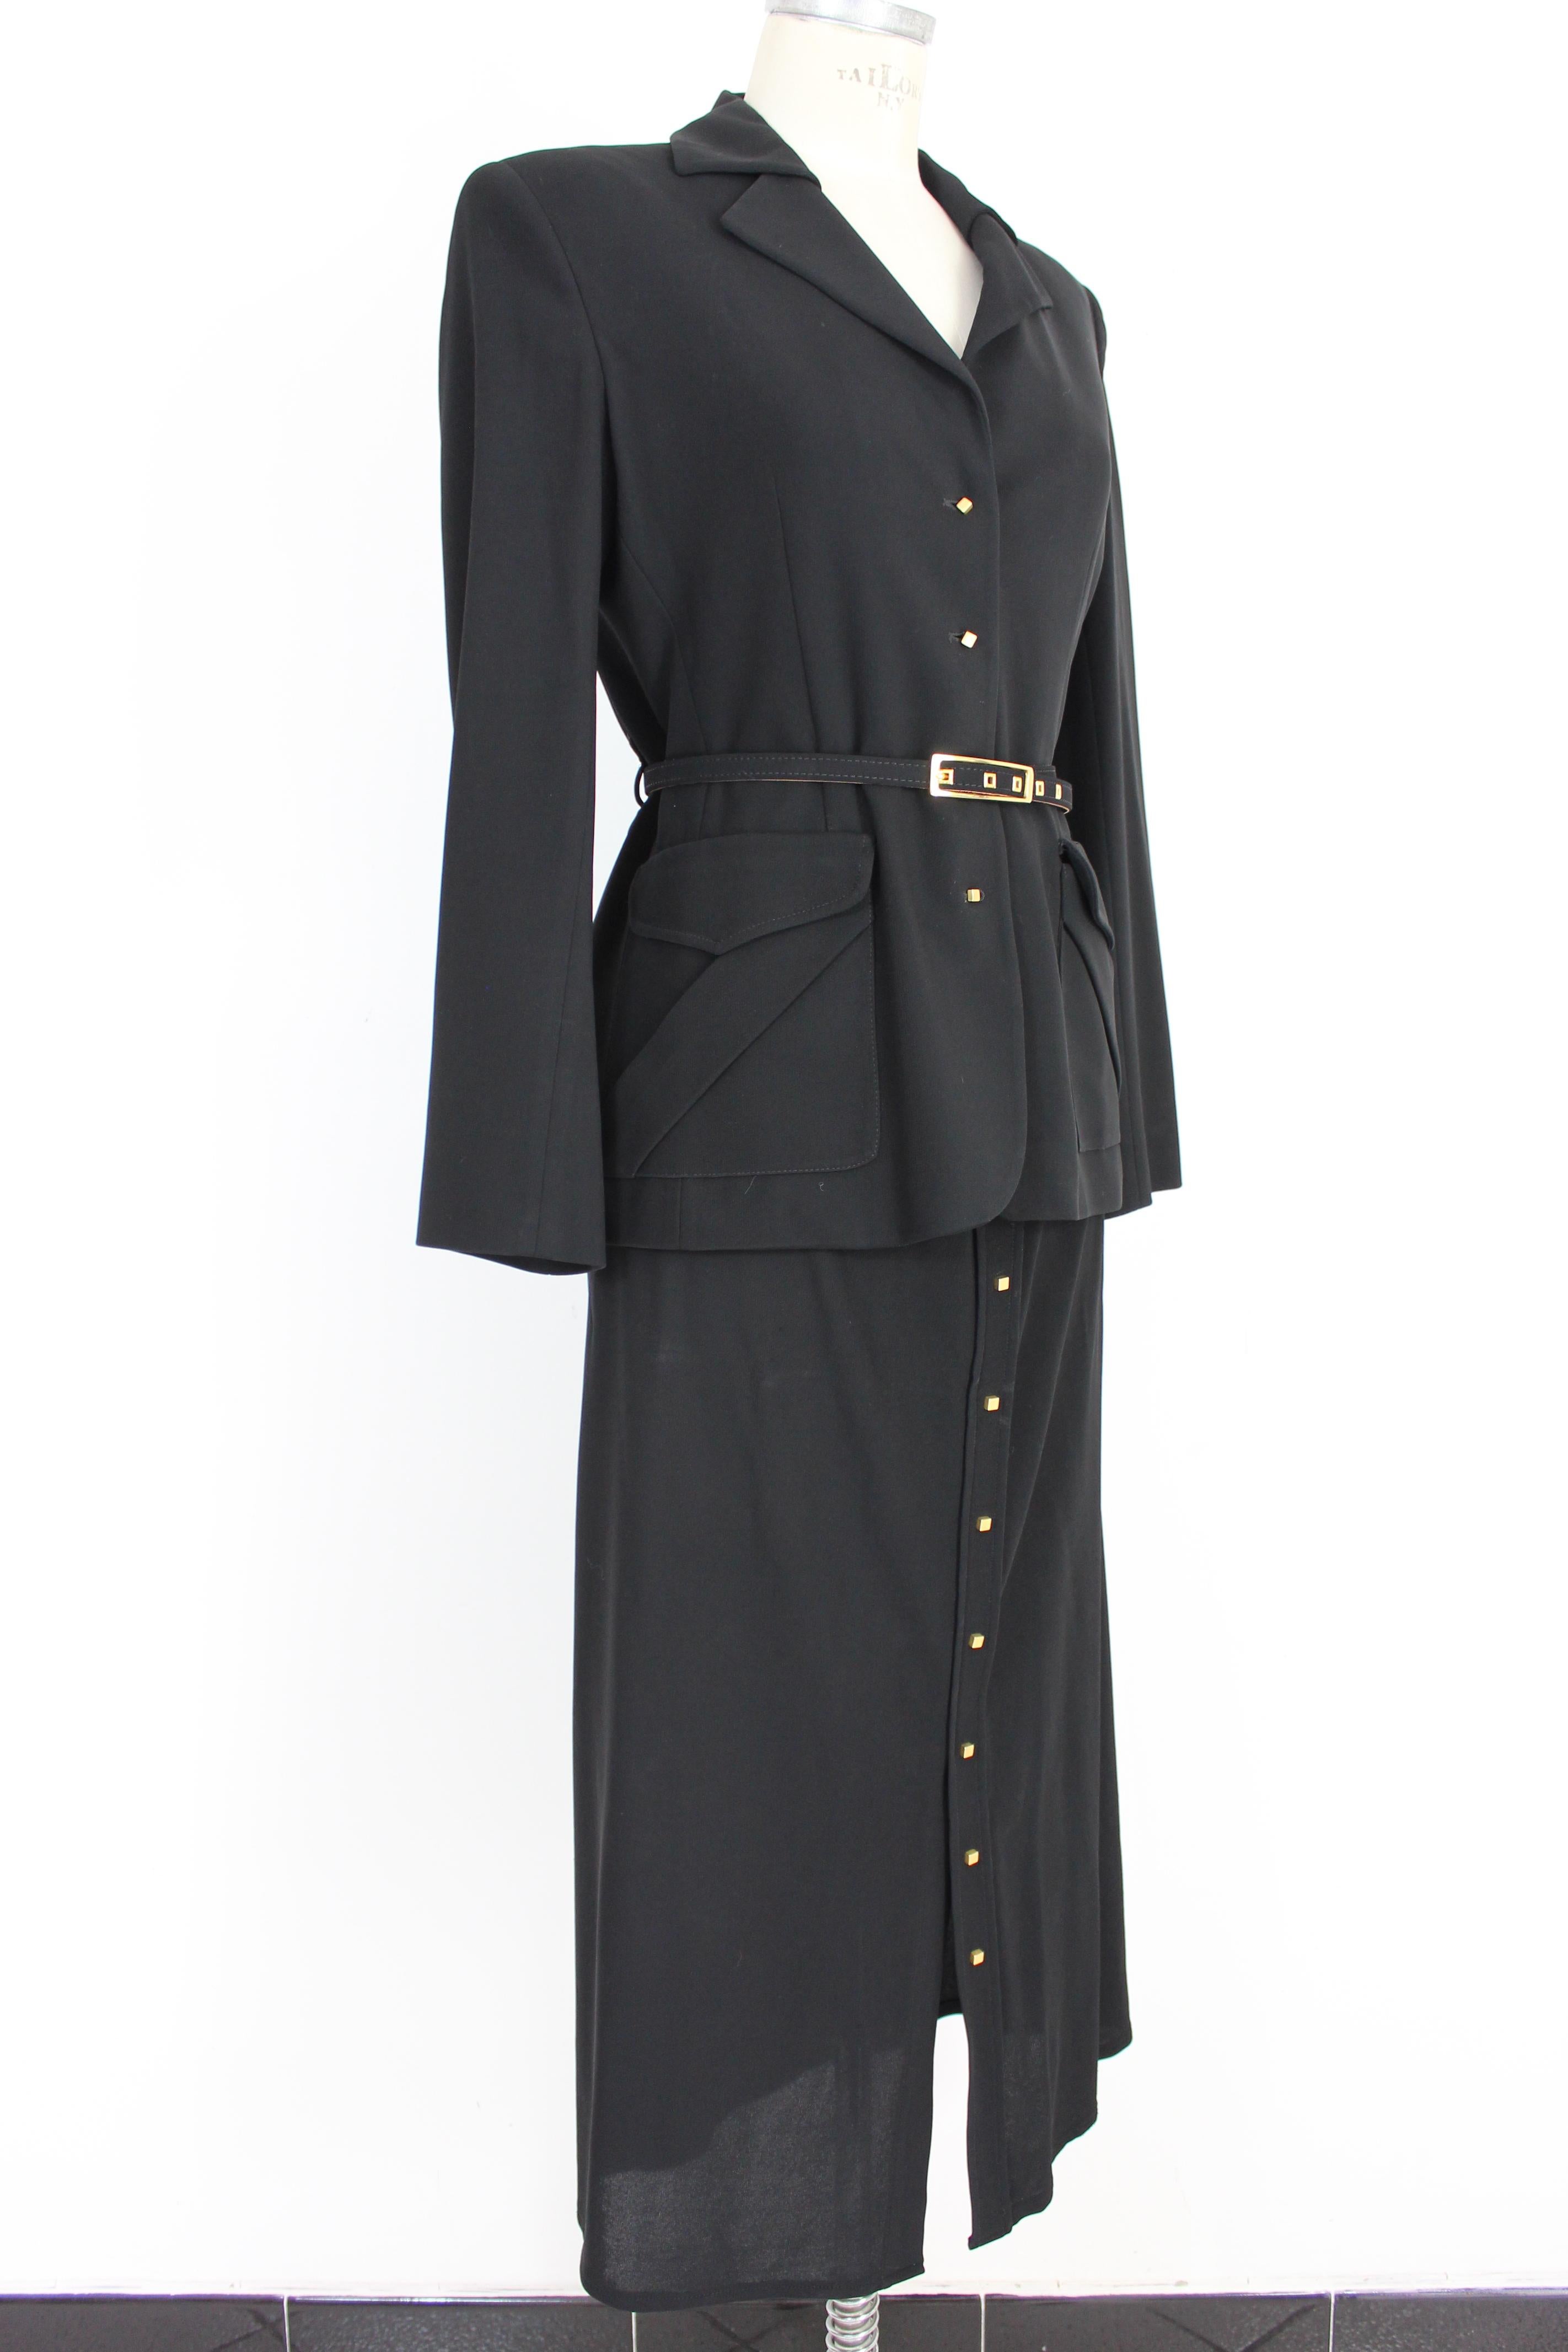 Women's Genny Black Gold Viscose Evening Suit Skirt and Jacket